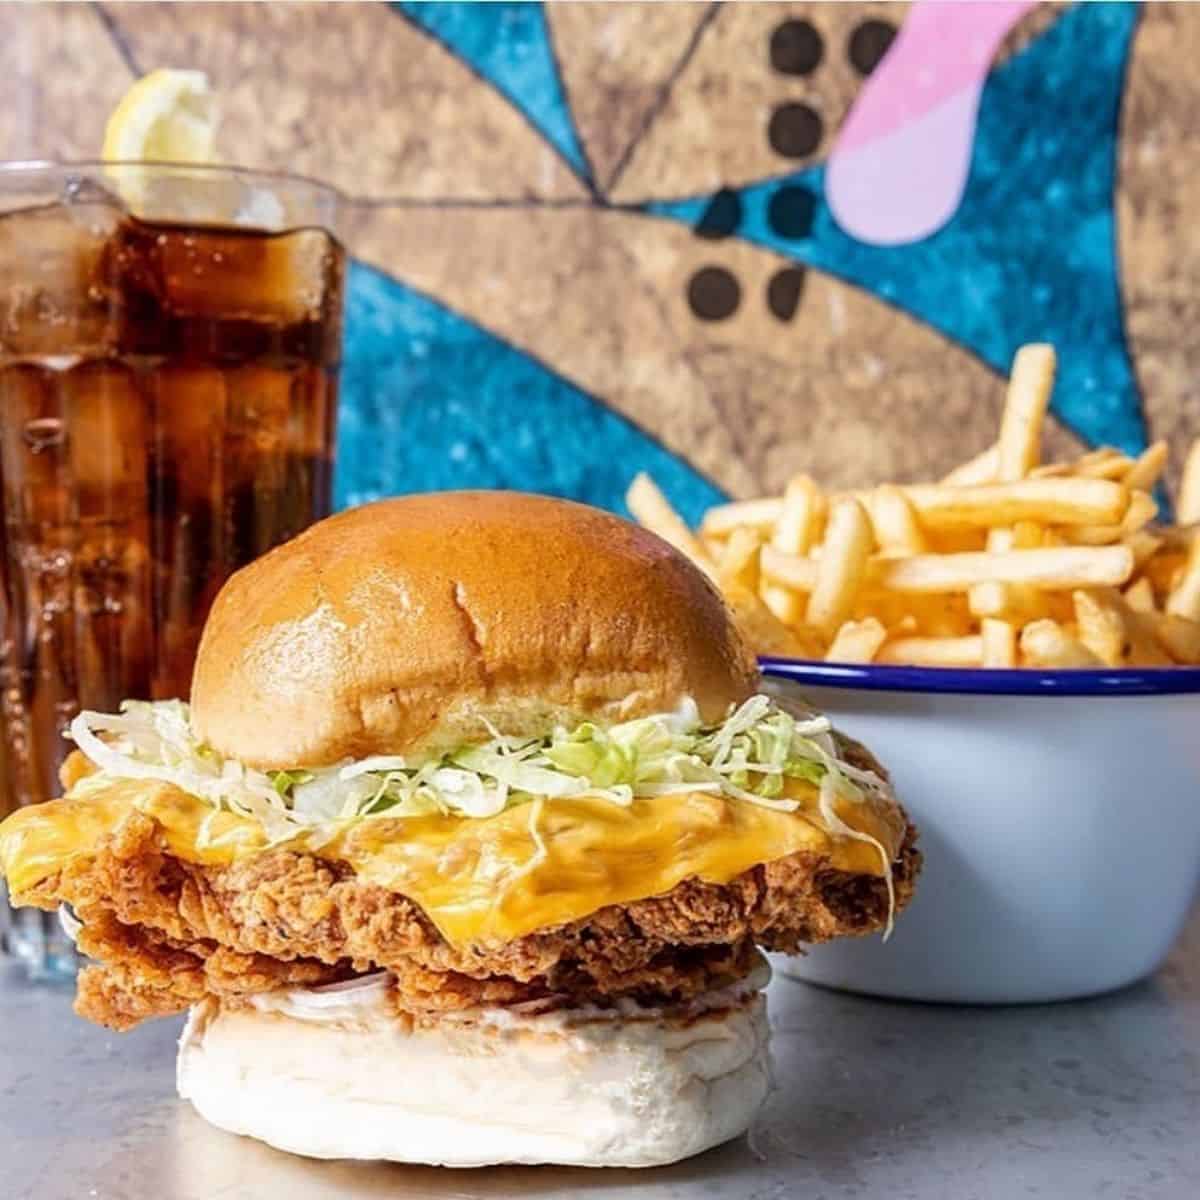 halal burger in london with chicken tenders, with lettuce and melted cheese